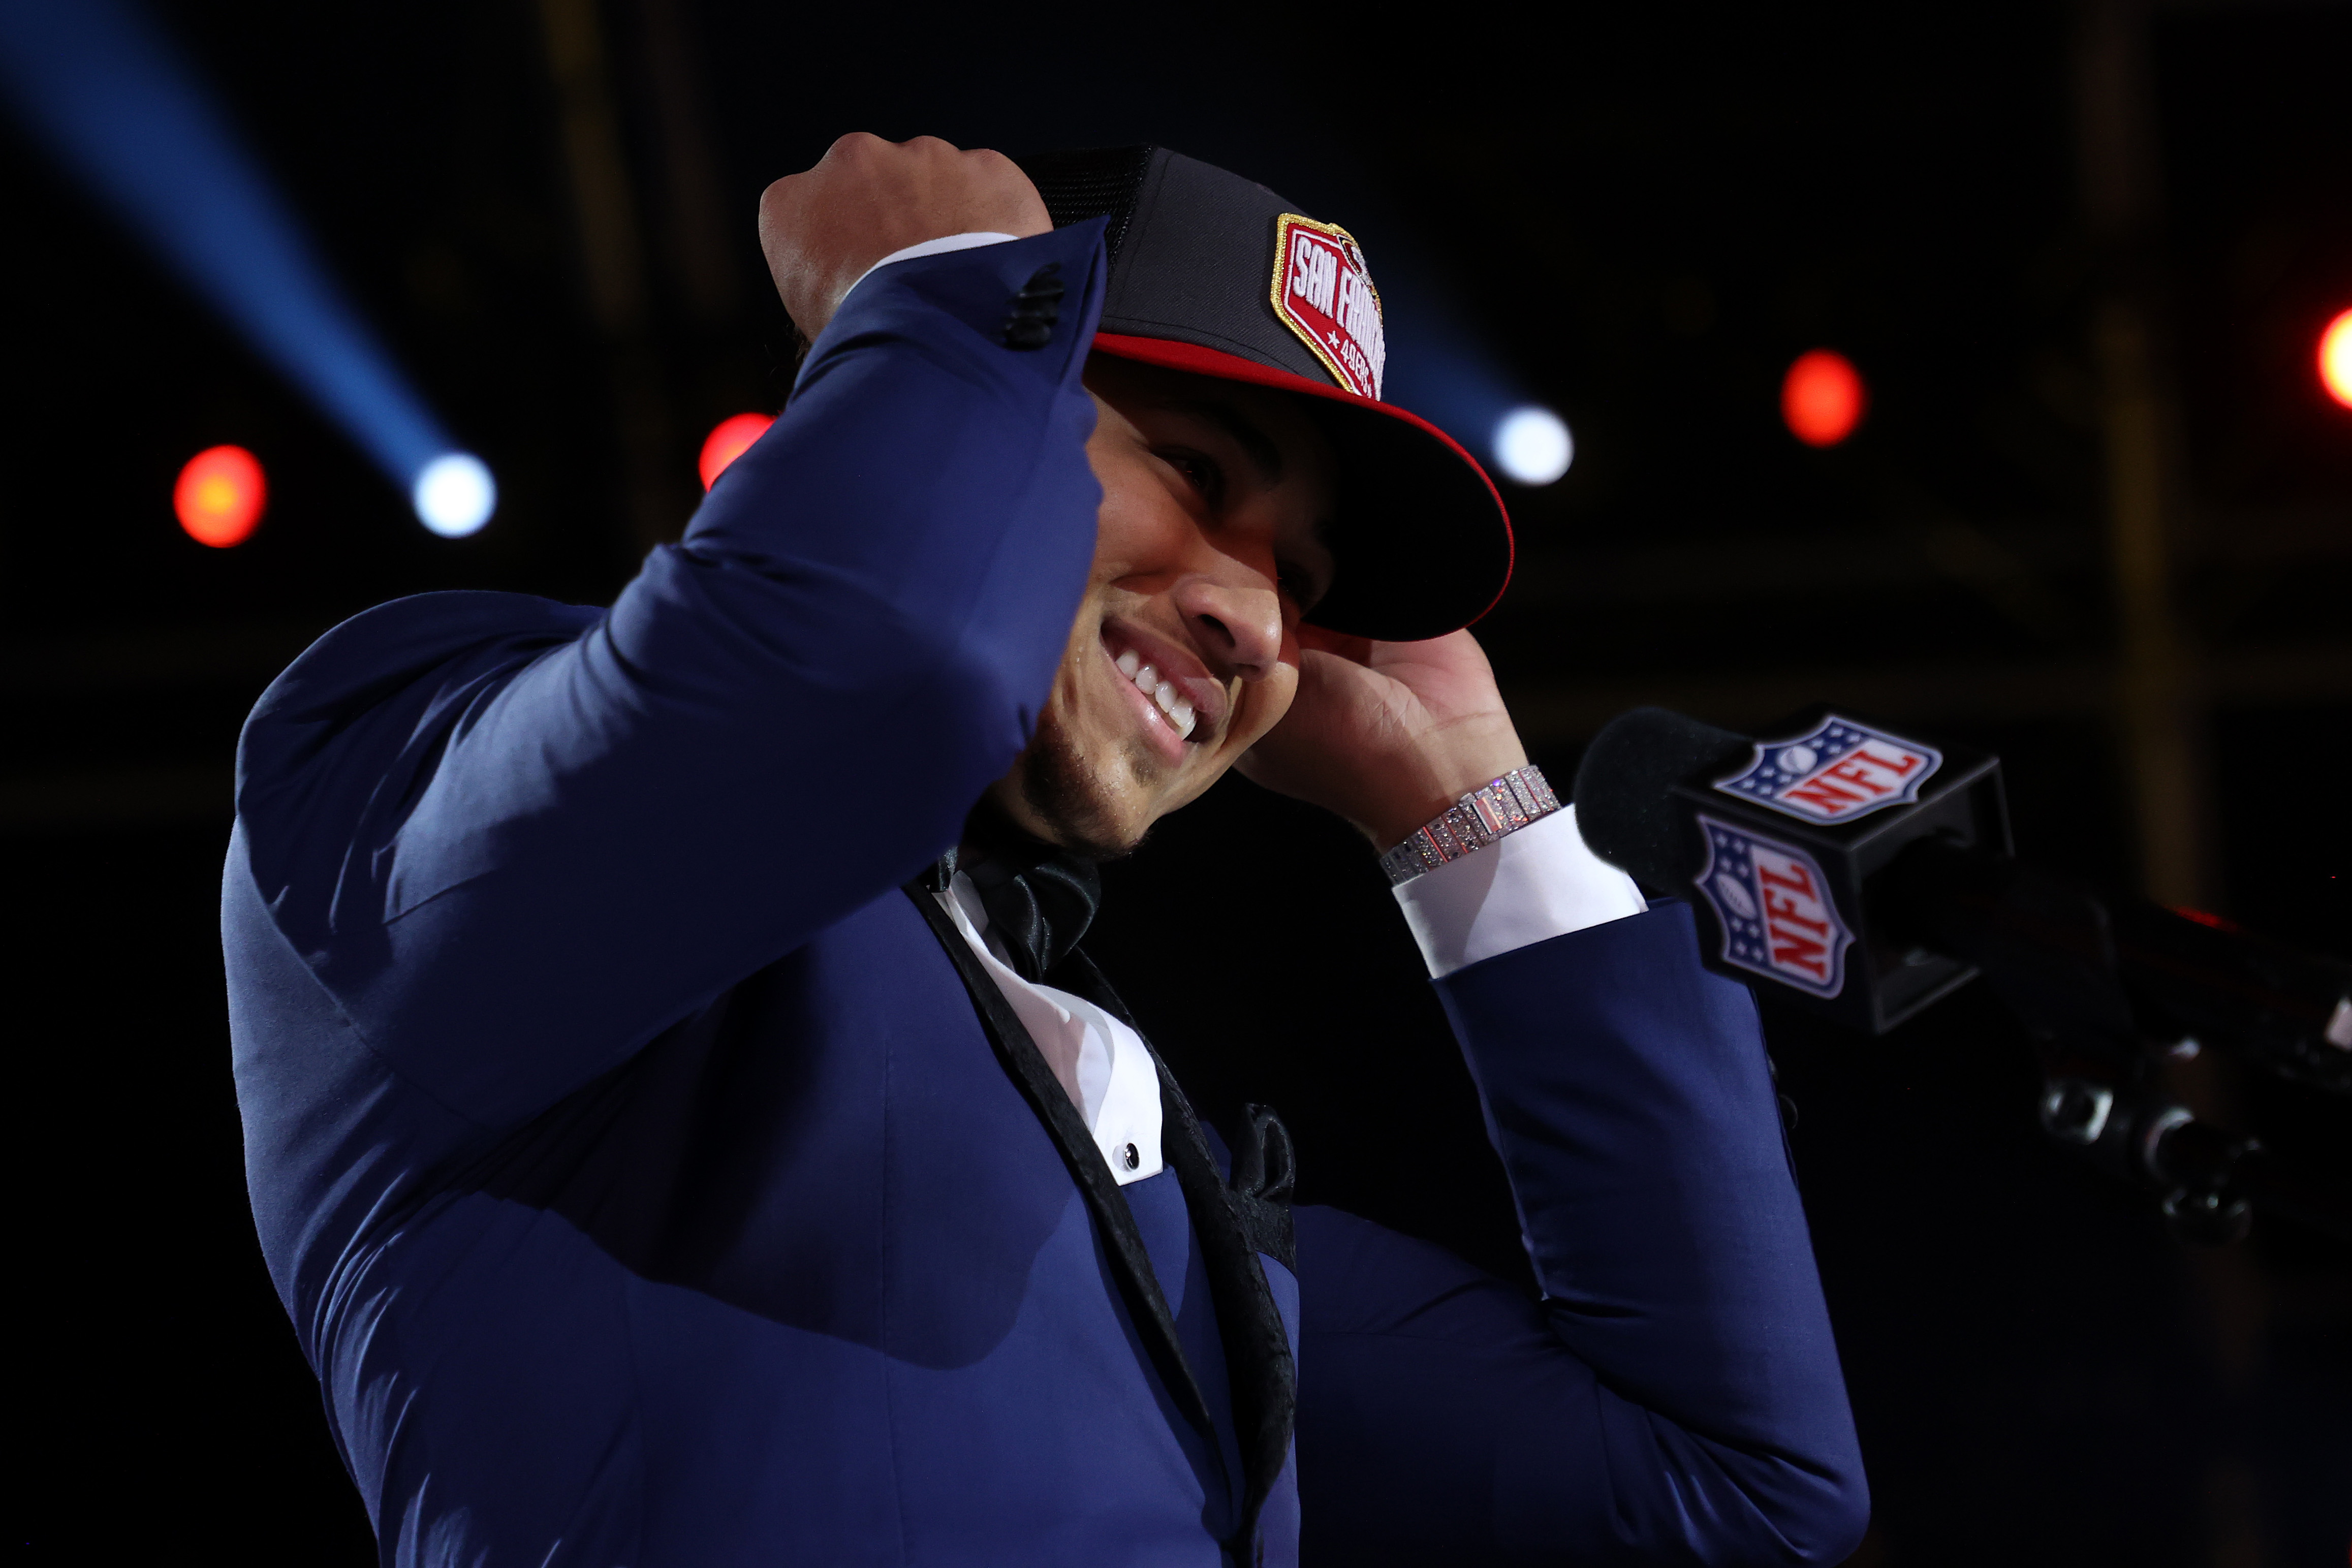 Trey Lance speaks onstage after being selected third by the San Francisco 49ers during round one of the 2021 NFL Draft at the Great Lakes Science Center on April 29, 2021 in Cleveland, Ohio.